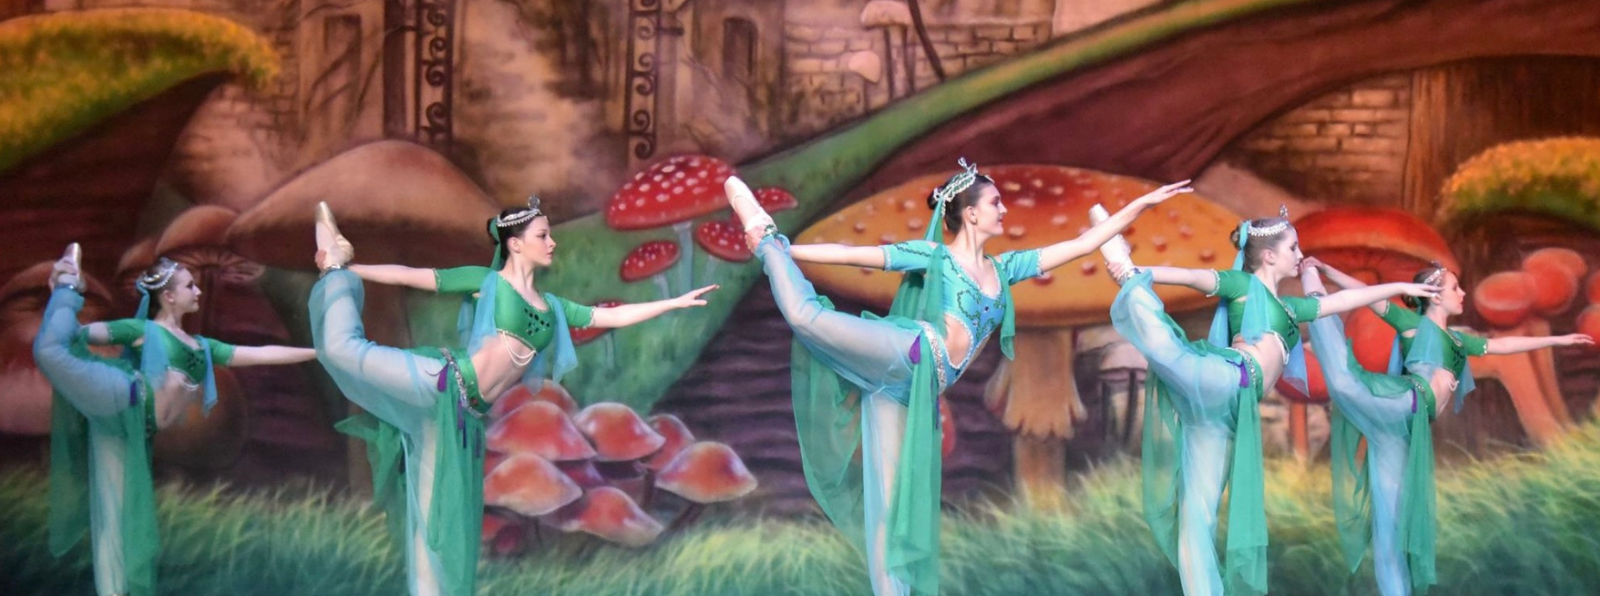 Five costumed people lift their right legs up while performing in front of a painted scene.